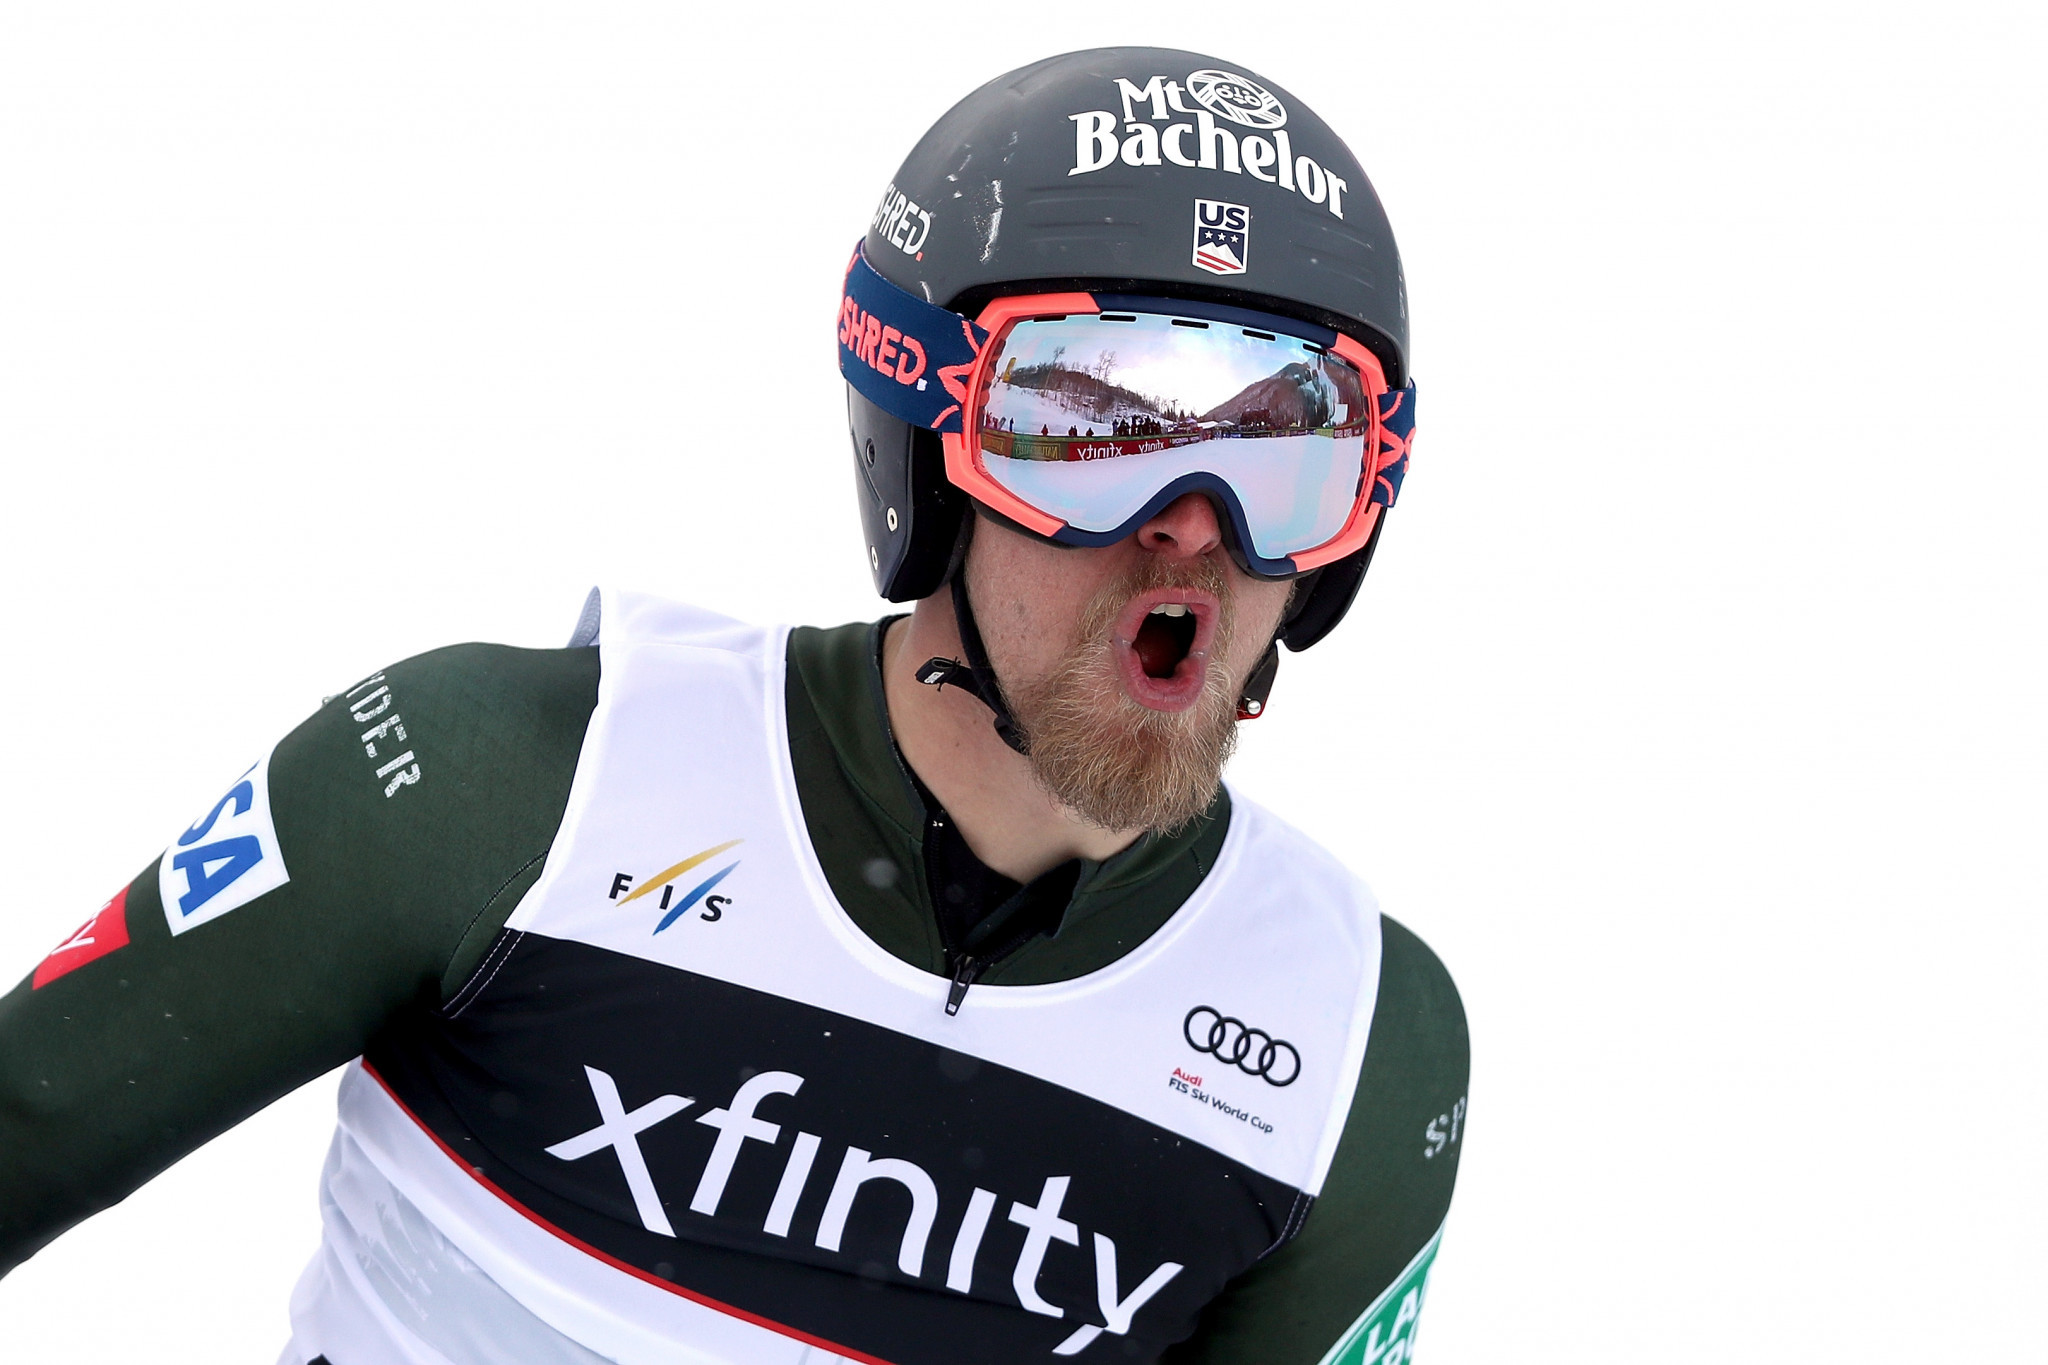 Tommy Ford, winner of the last FIS Men's Alpine World Cup giant slalom event on the home snow of Beaver Creek in the United States, will be seeking to maintain his form ©Getty Images